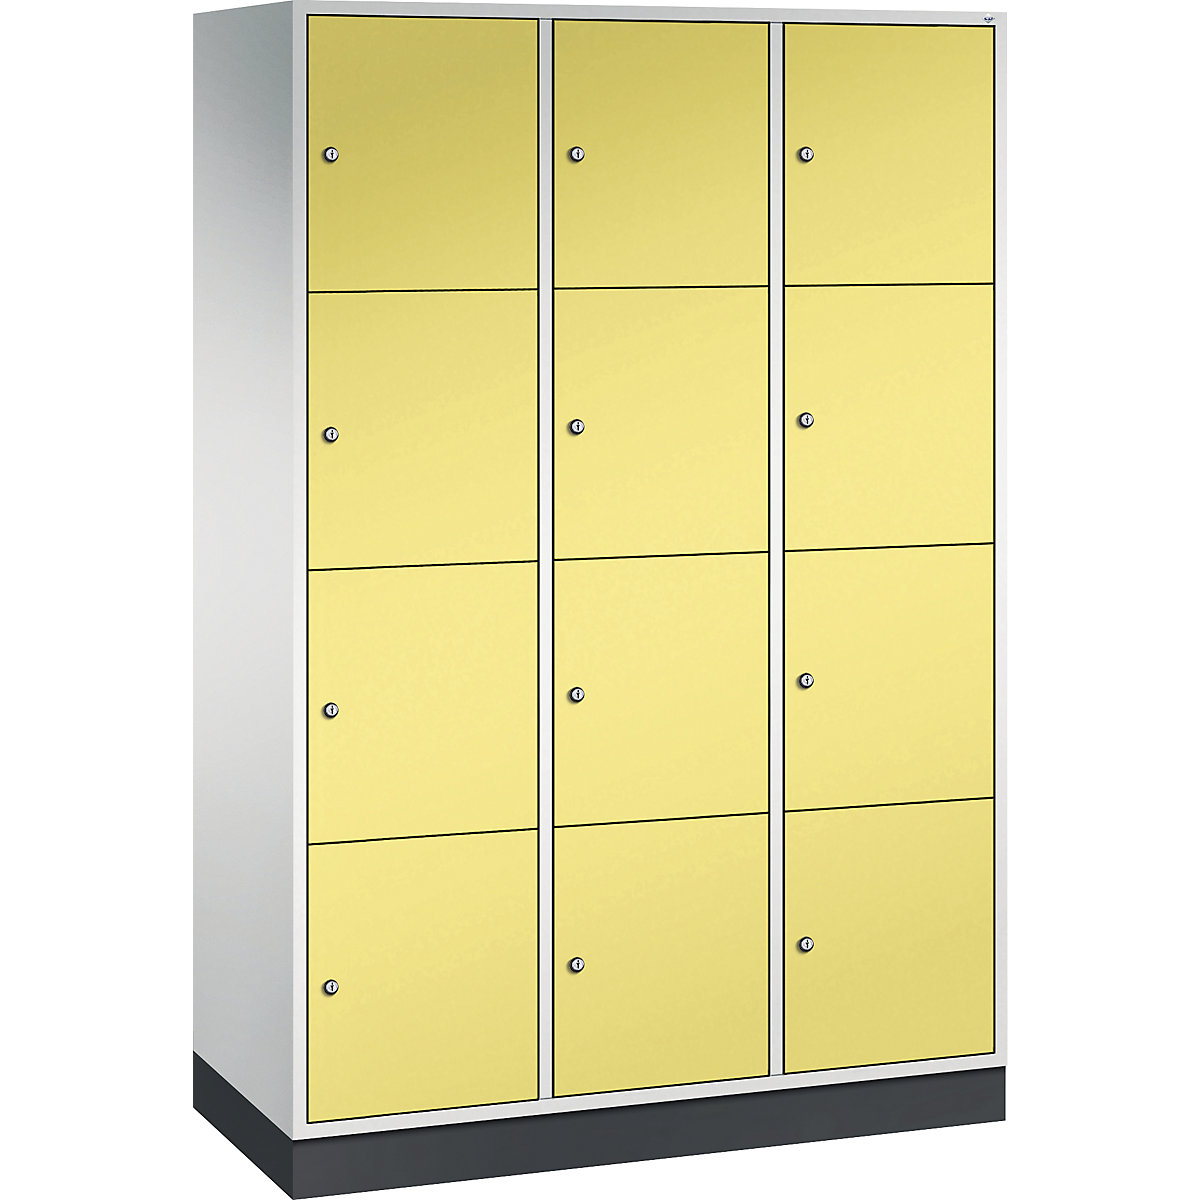 INTRO steel compartment locker, compartment height 435 mm – C+P, WxD 1220 x 500 mm, 12 compartments, light grey body, sulphur yellow doors